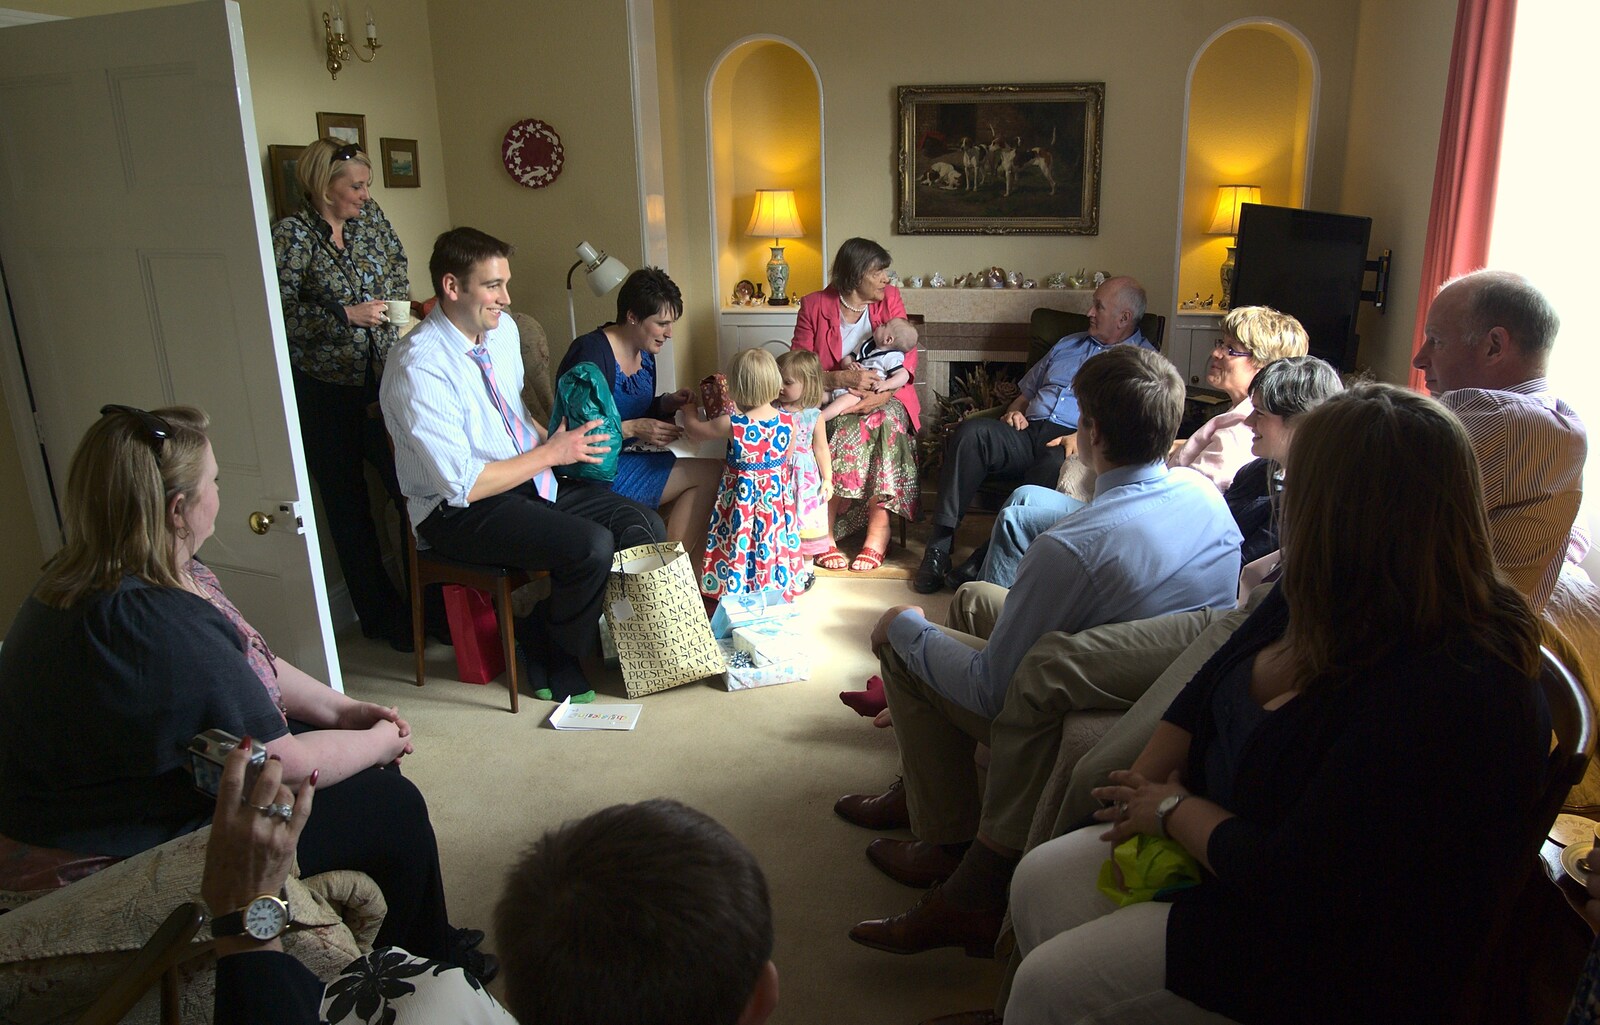 A present-opening session from A Christening, Wilford, Northamptonshire - 22nd May 2011